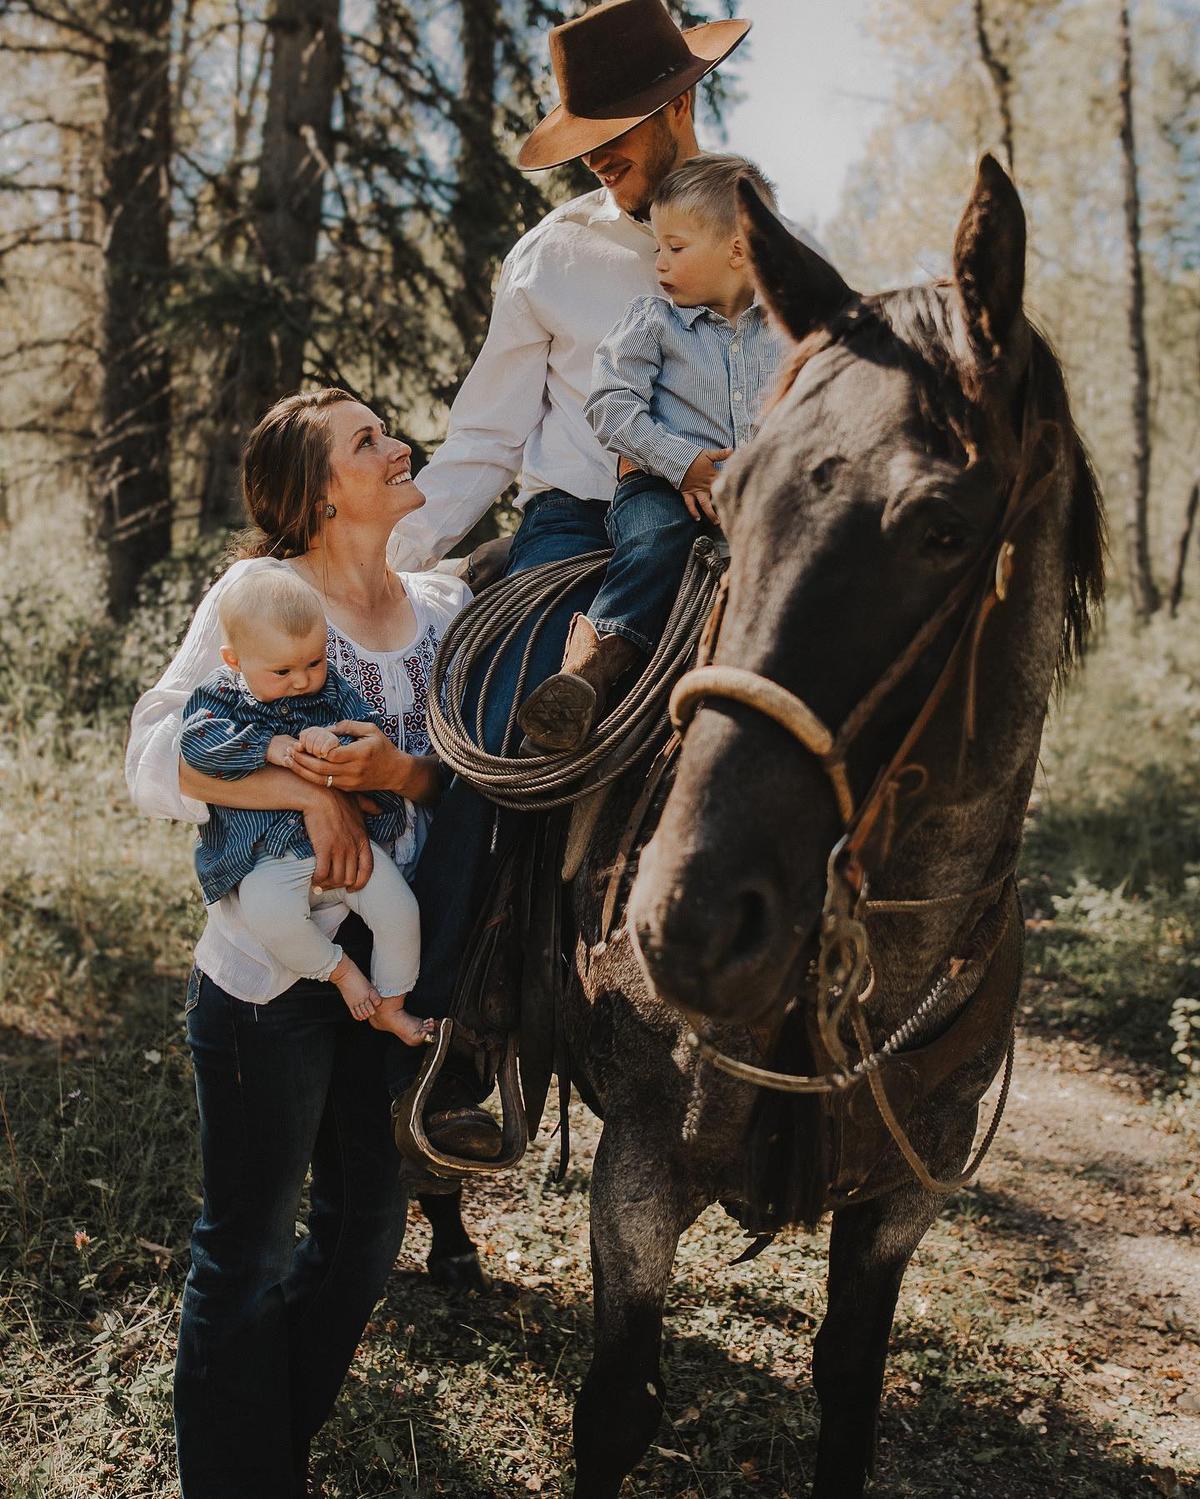 (Courtesy of Silver and Sage by Kari Martens via <a href="https://www.instagram.com/fortysevenranchco/">Vanessa Ould</a>)